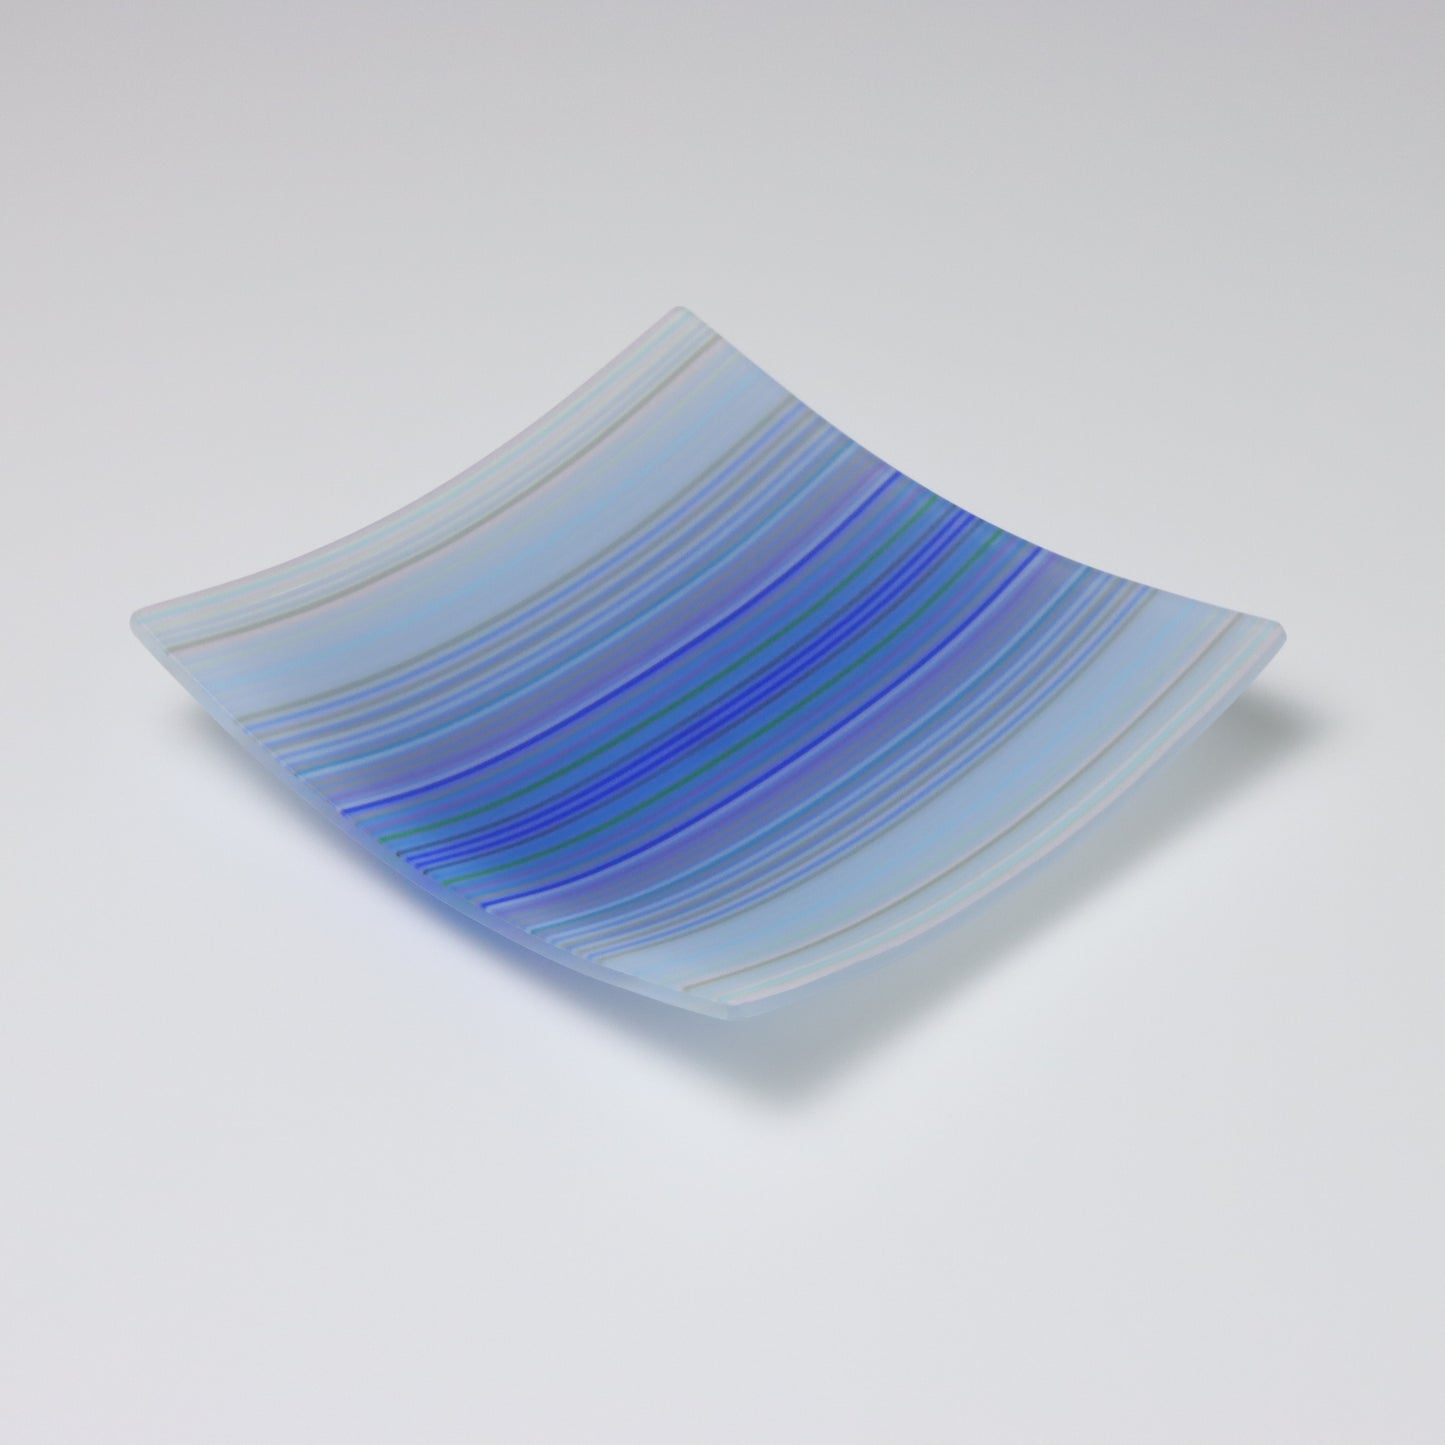 A decorative square shallow glass plate with raised corners and a  colourful ColourWave stripe patterns showing key colours of pale blues, lilac and darker blues in the center